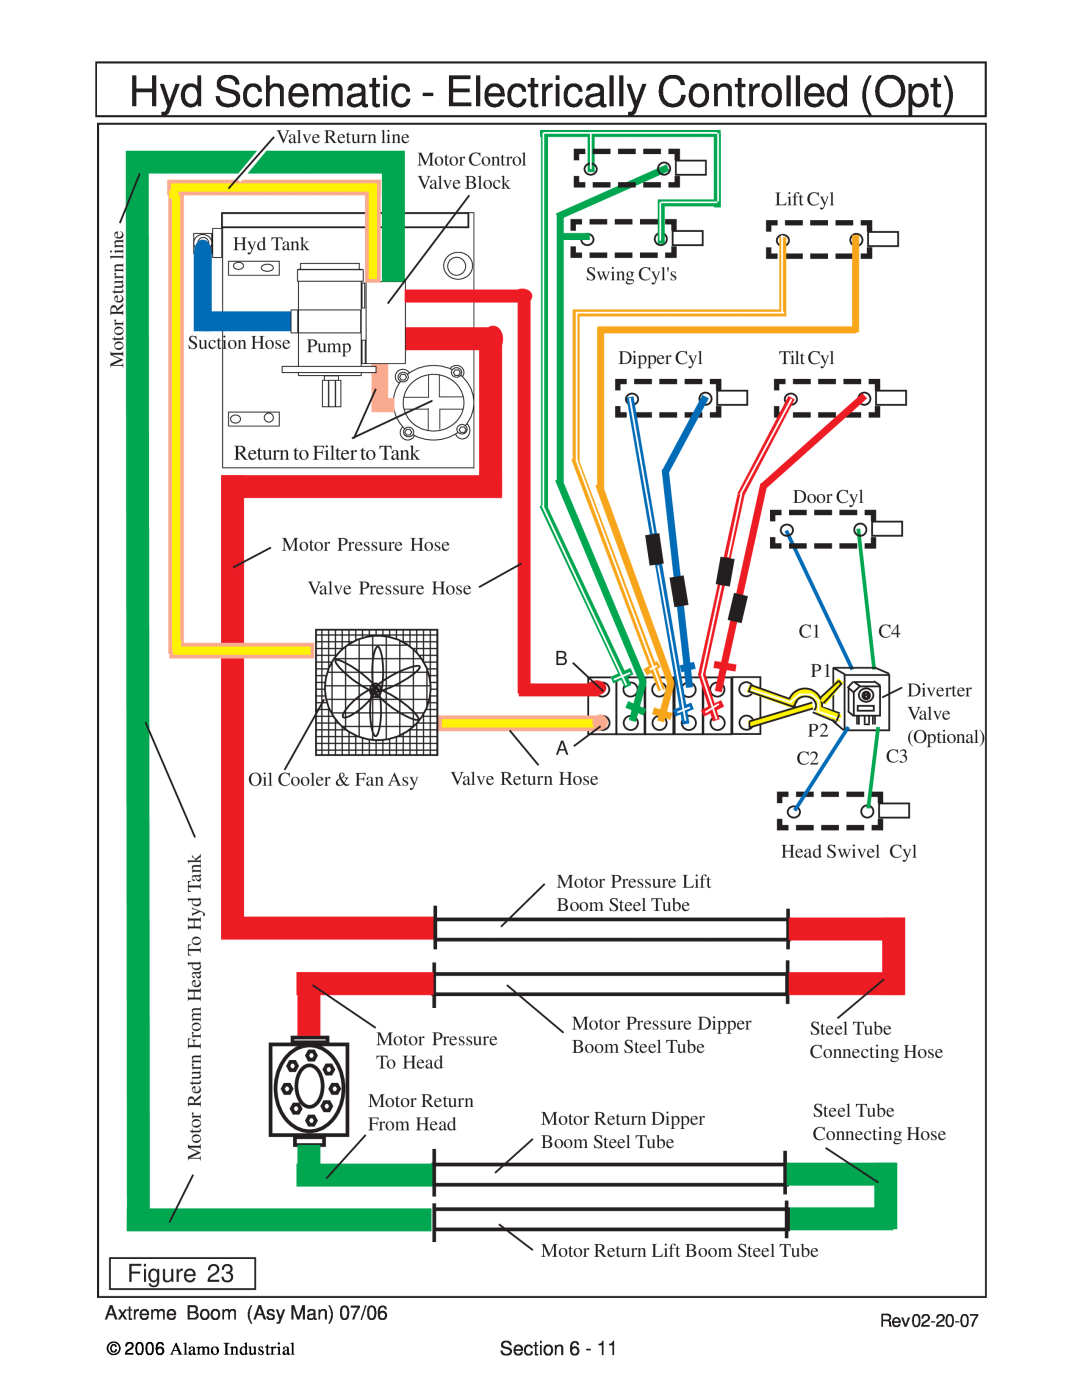 Alamo 02984405 instruction manual Hyd Schematic - Electrically Controlled Opt, Return to Filter to Tank 